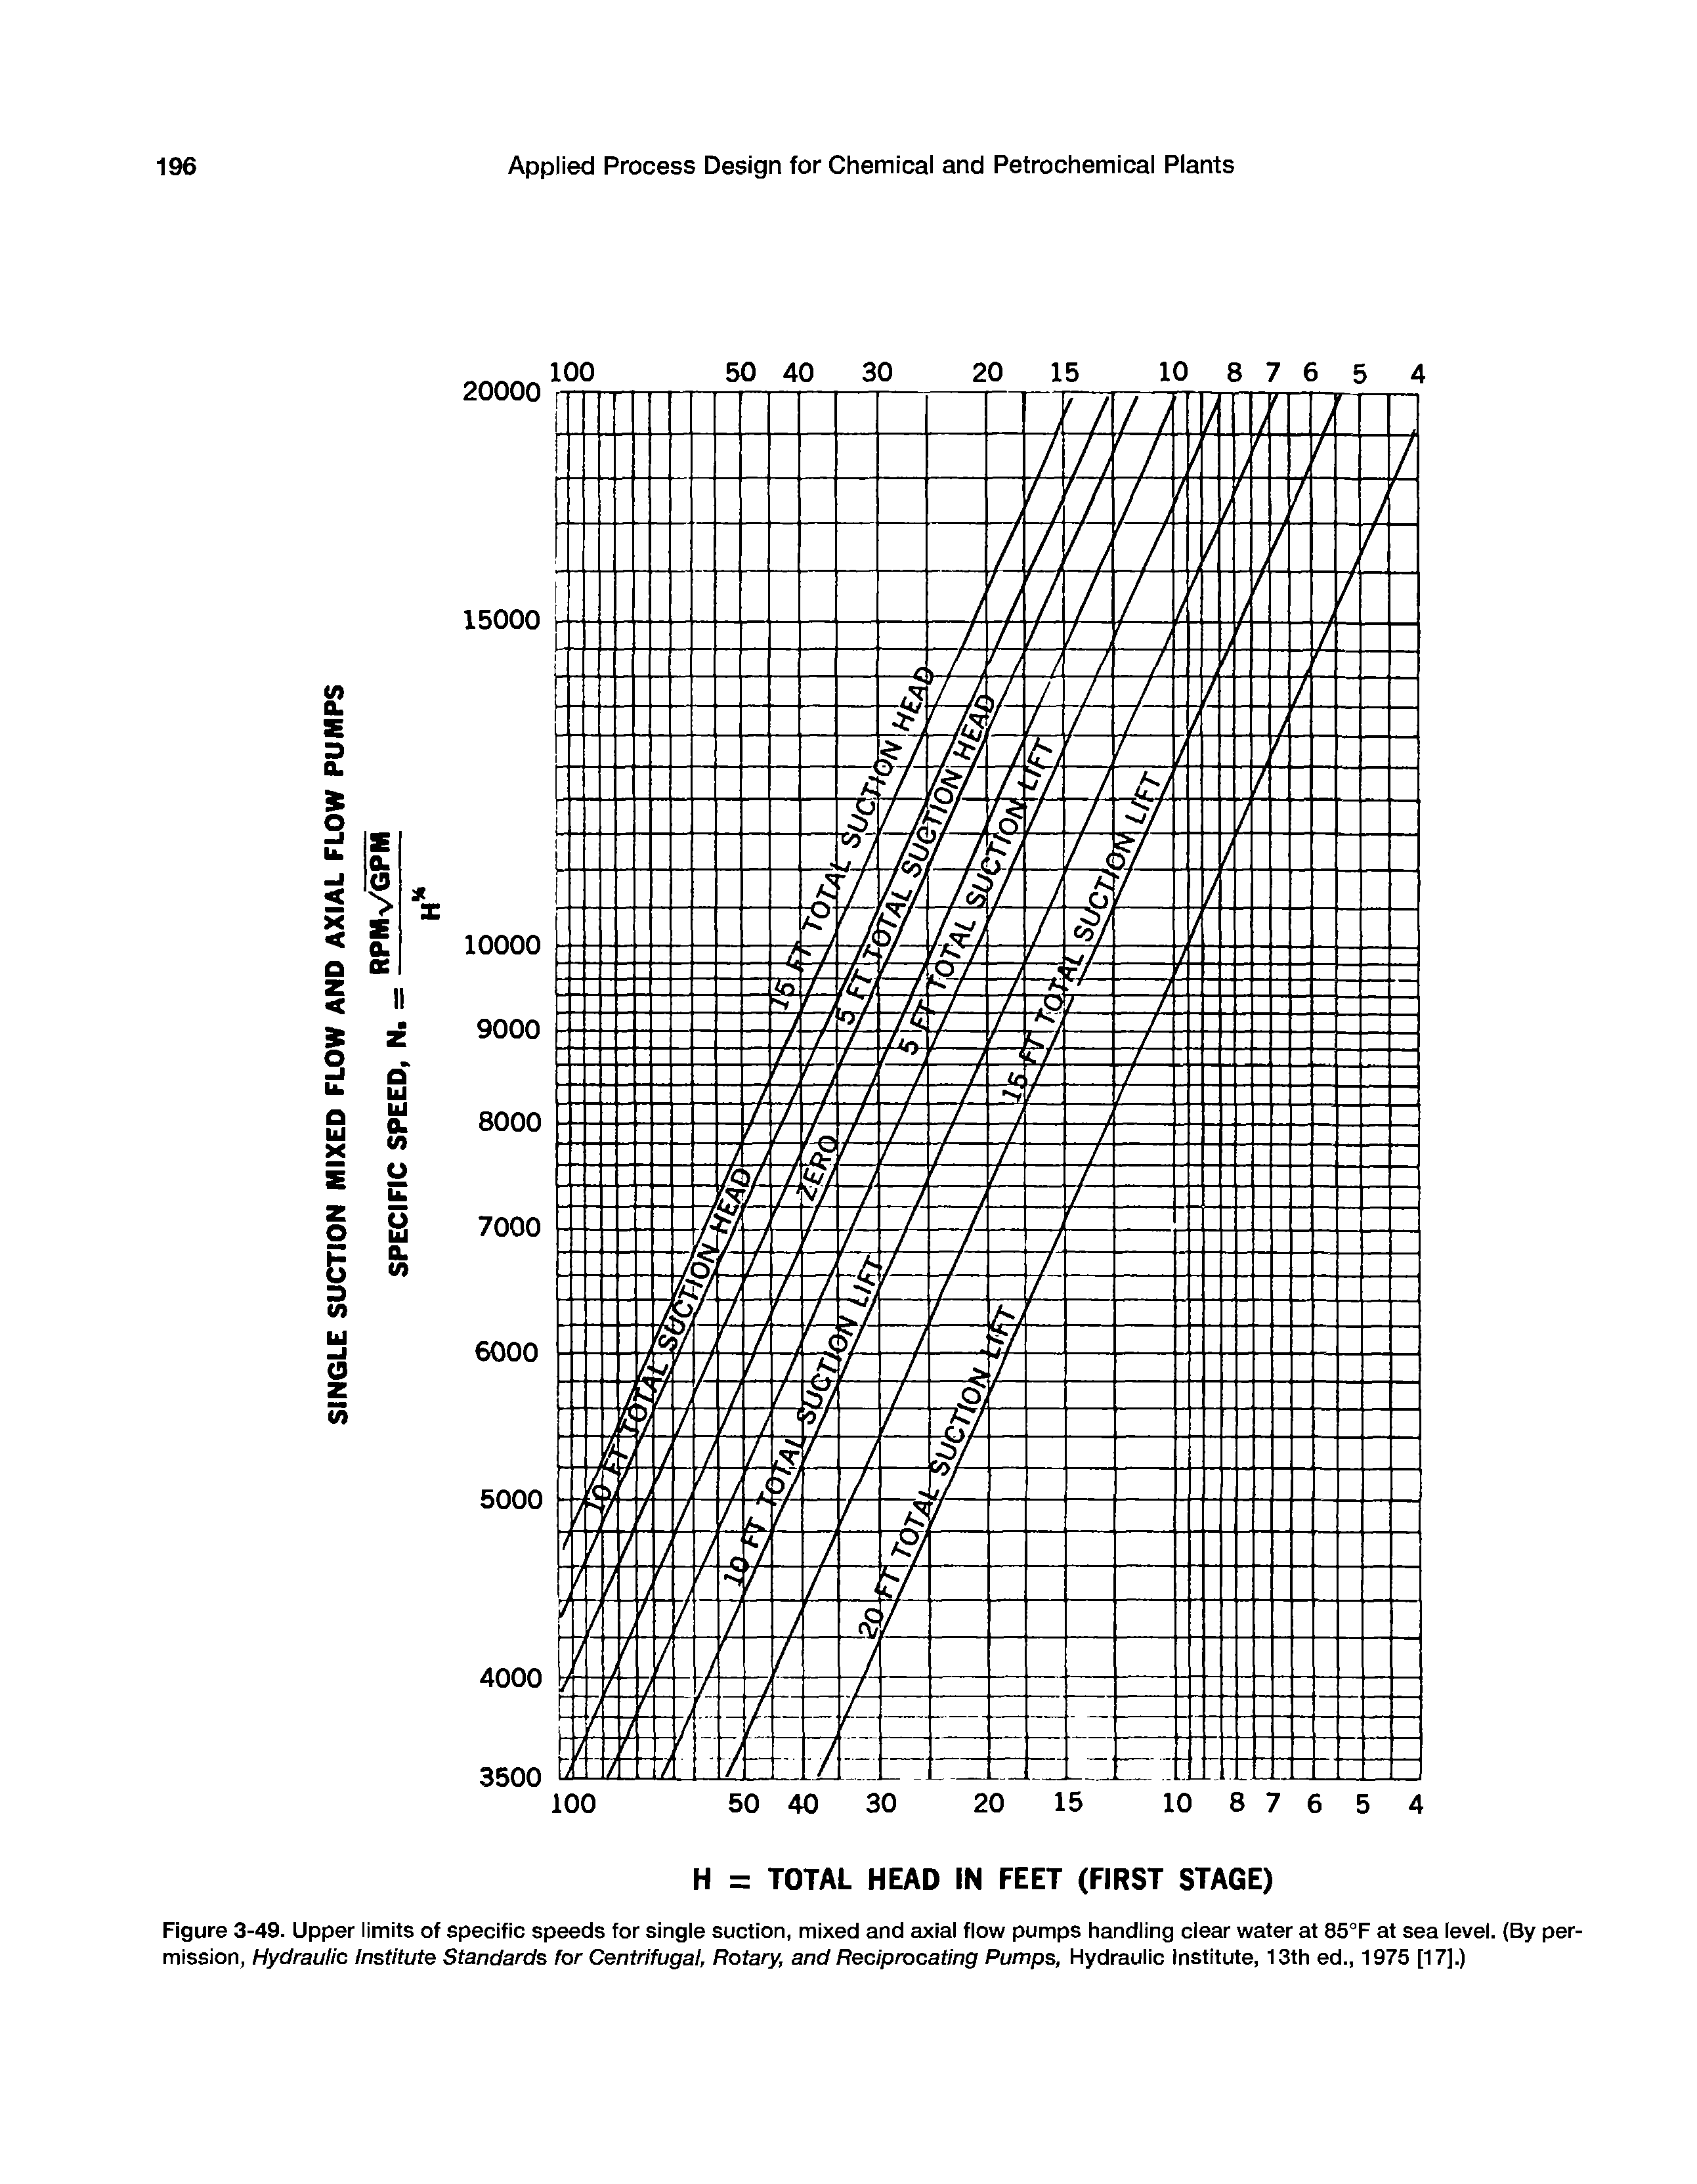 Figure 3-49. Upper limits of specific speeds for single suction, mixed and axial flow pumps handling clear water at 85°F at sea level. By permission, Hydraulic Institute Standards for Centrifugal, Rotary, and Reciprocating Pumps, Hydraulic Institute, 13th ed., 1975 [17].)...